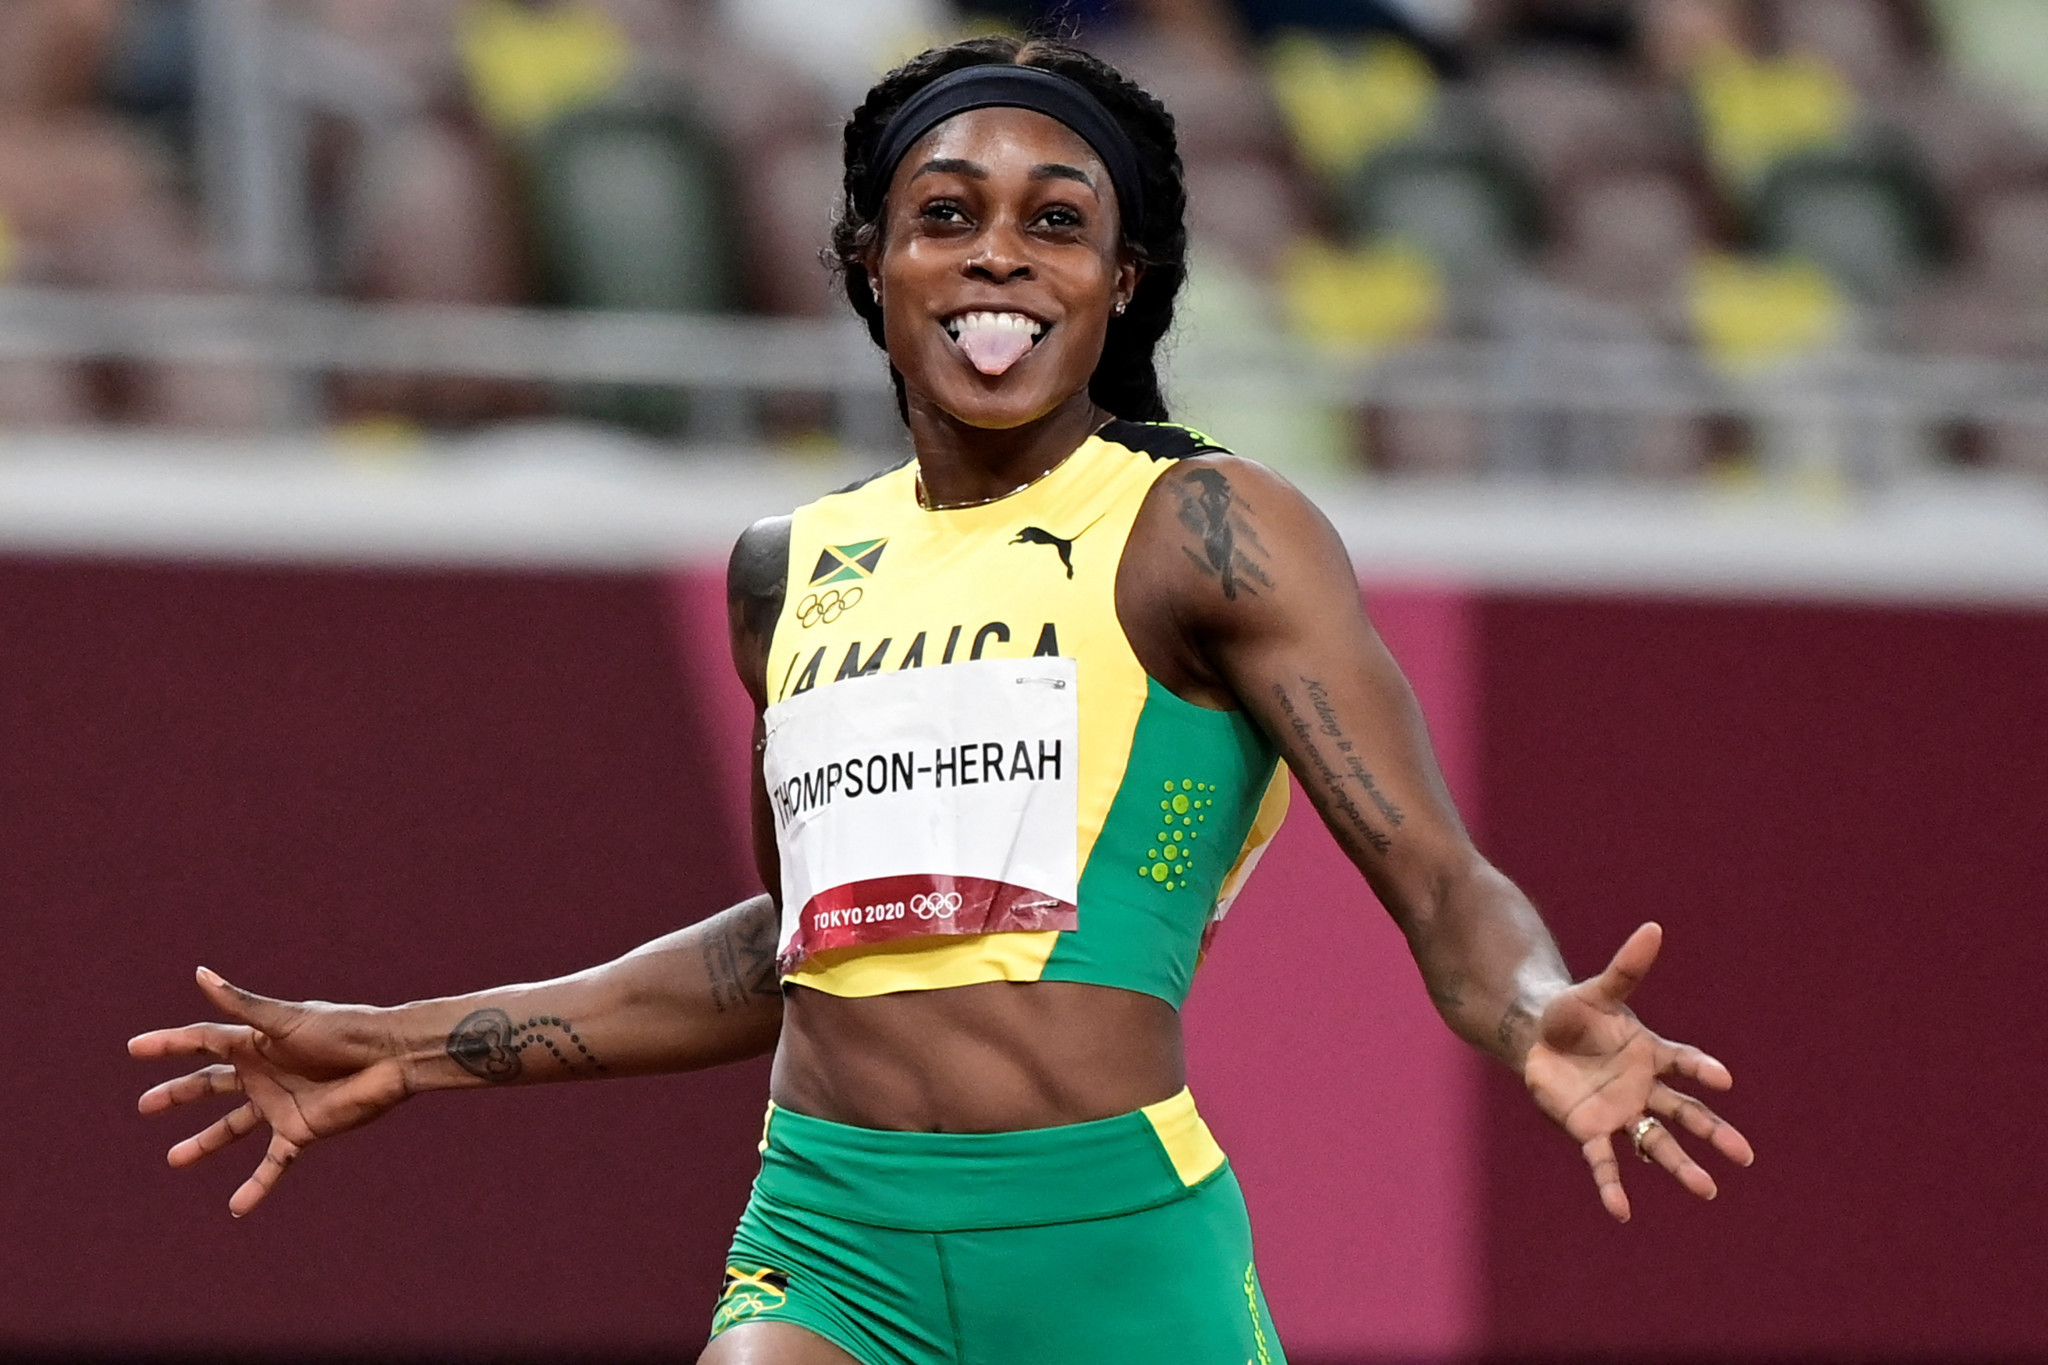 Elaine Thompson-Herah of Jamaica was named Female Athlete of the Year, the last athlete to receive their accolade at the World Athletics Awards ©Getty Images